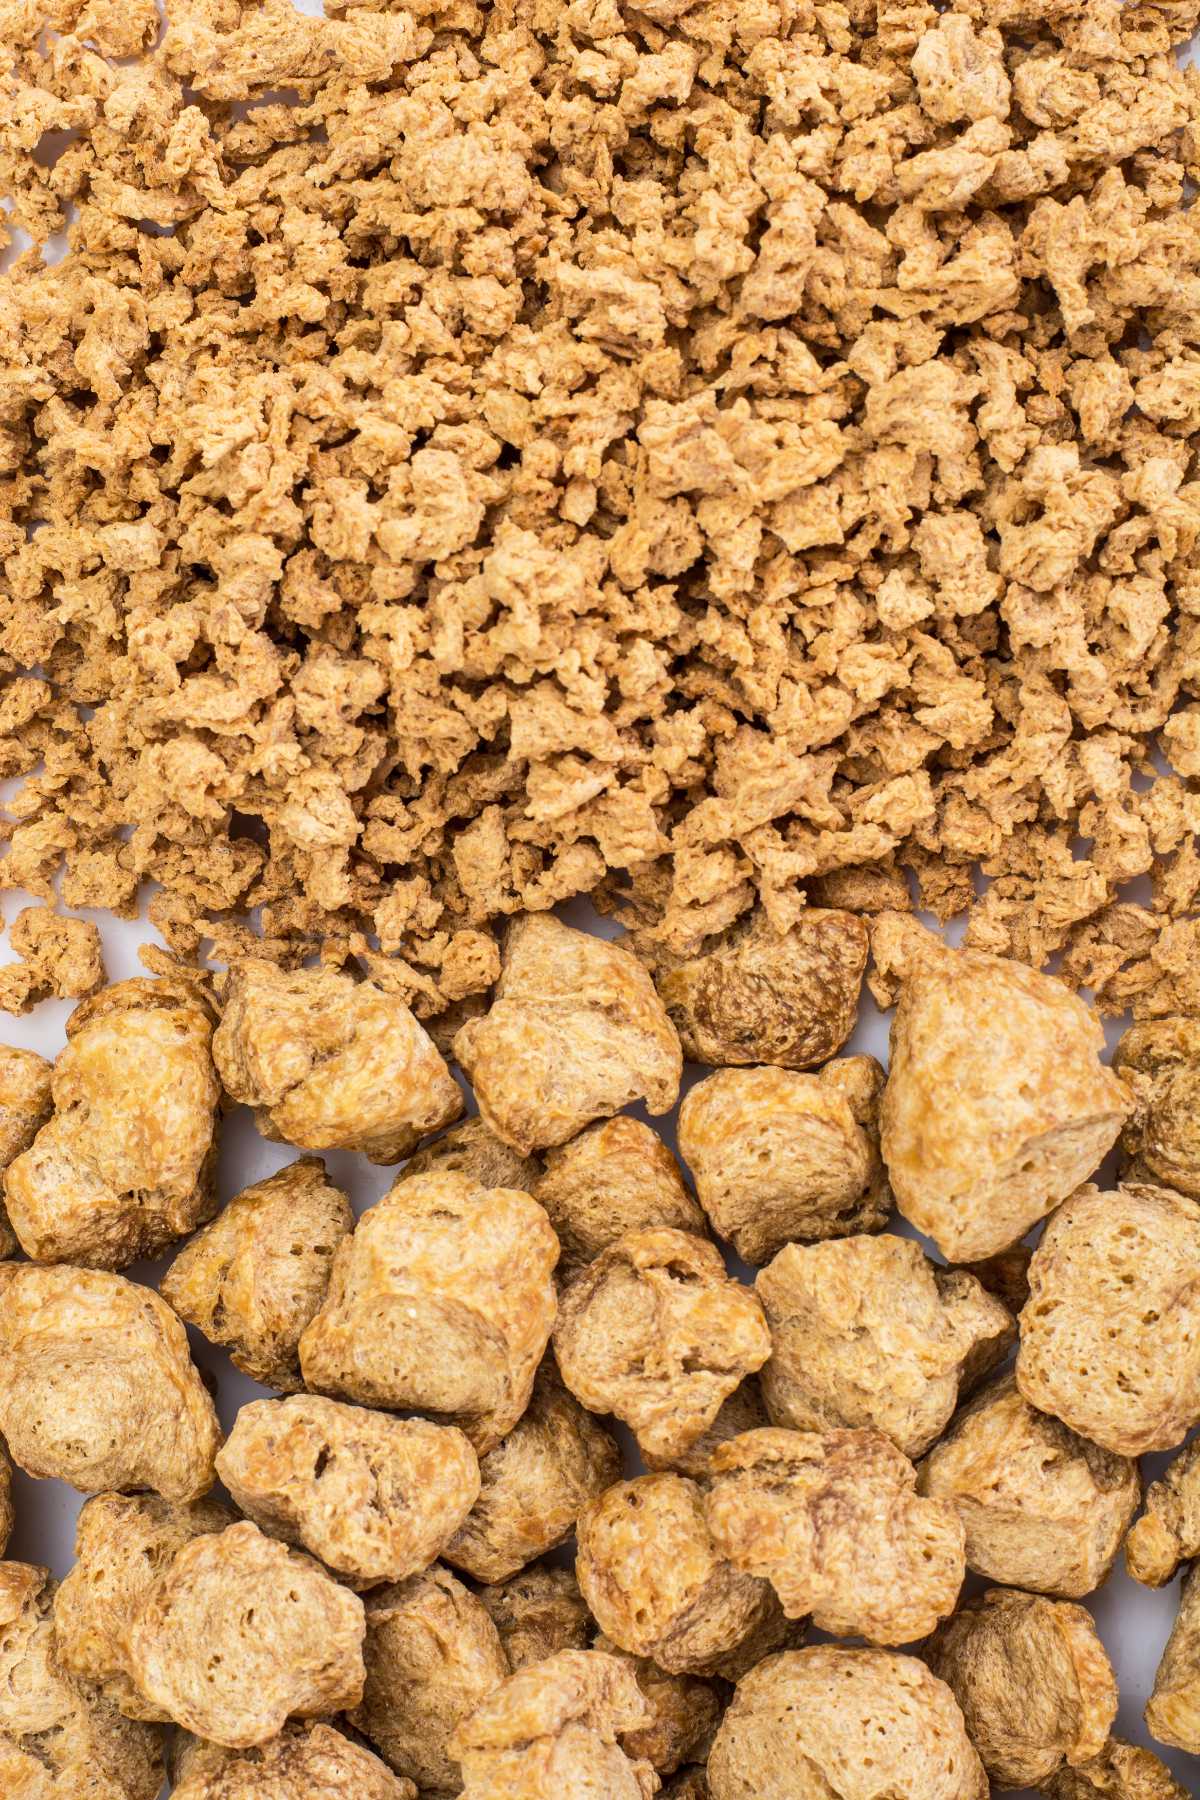 large and small pieces of dehydrated soy protein